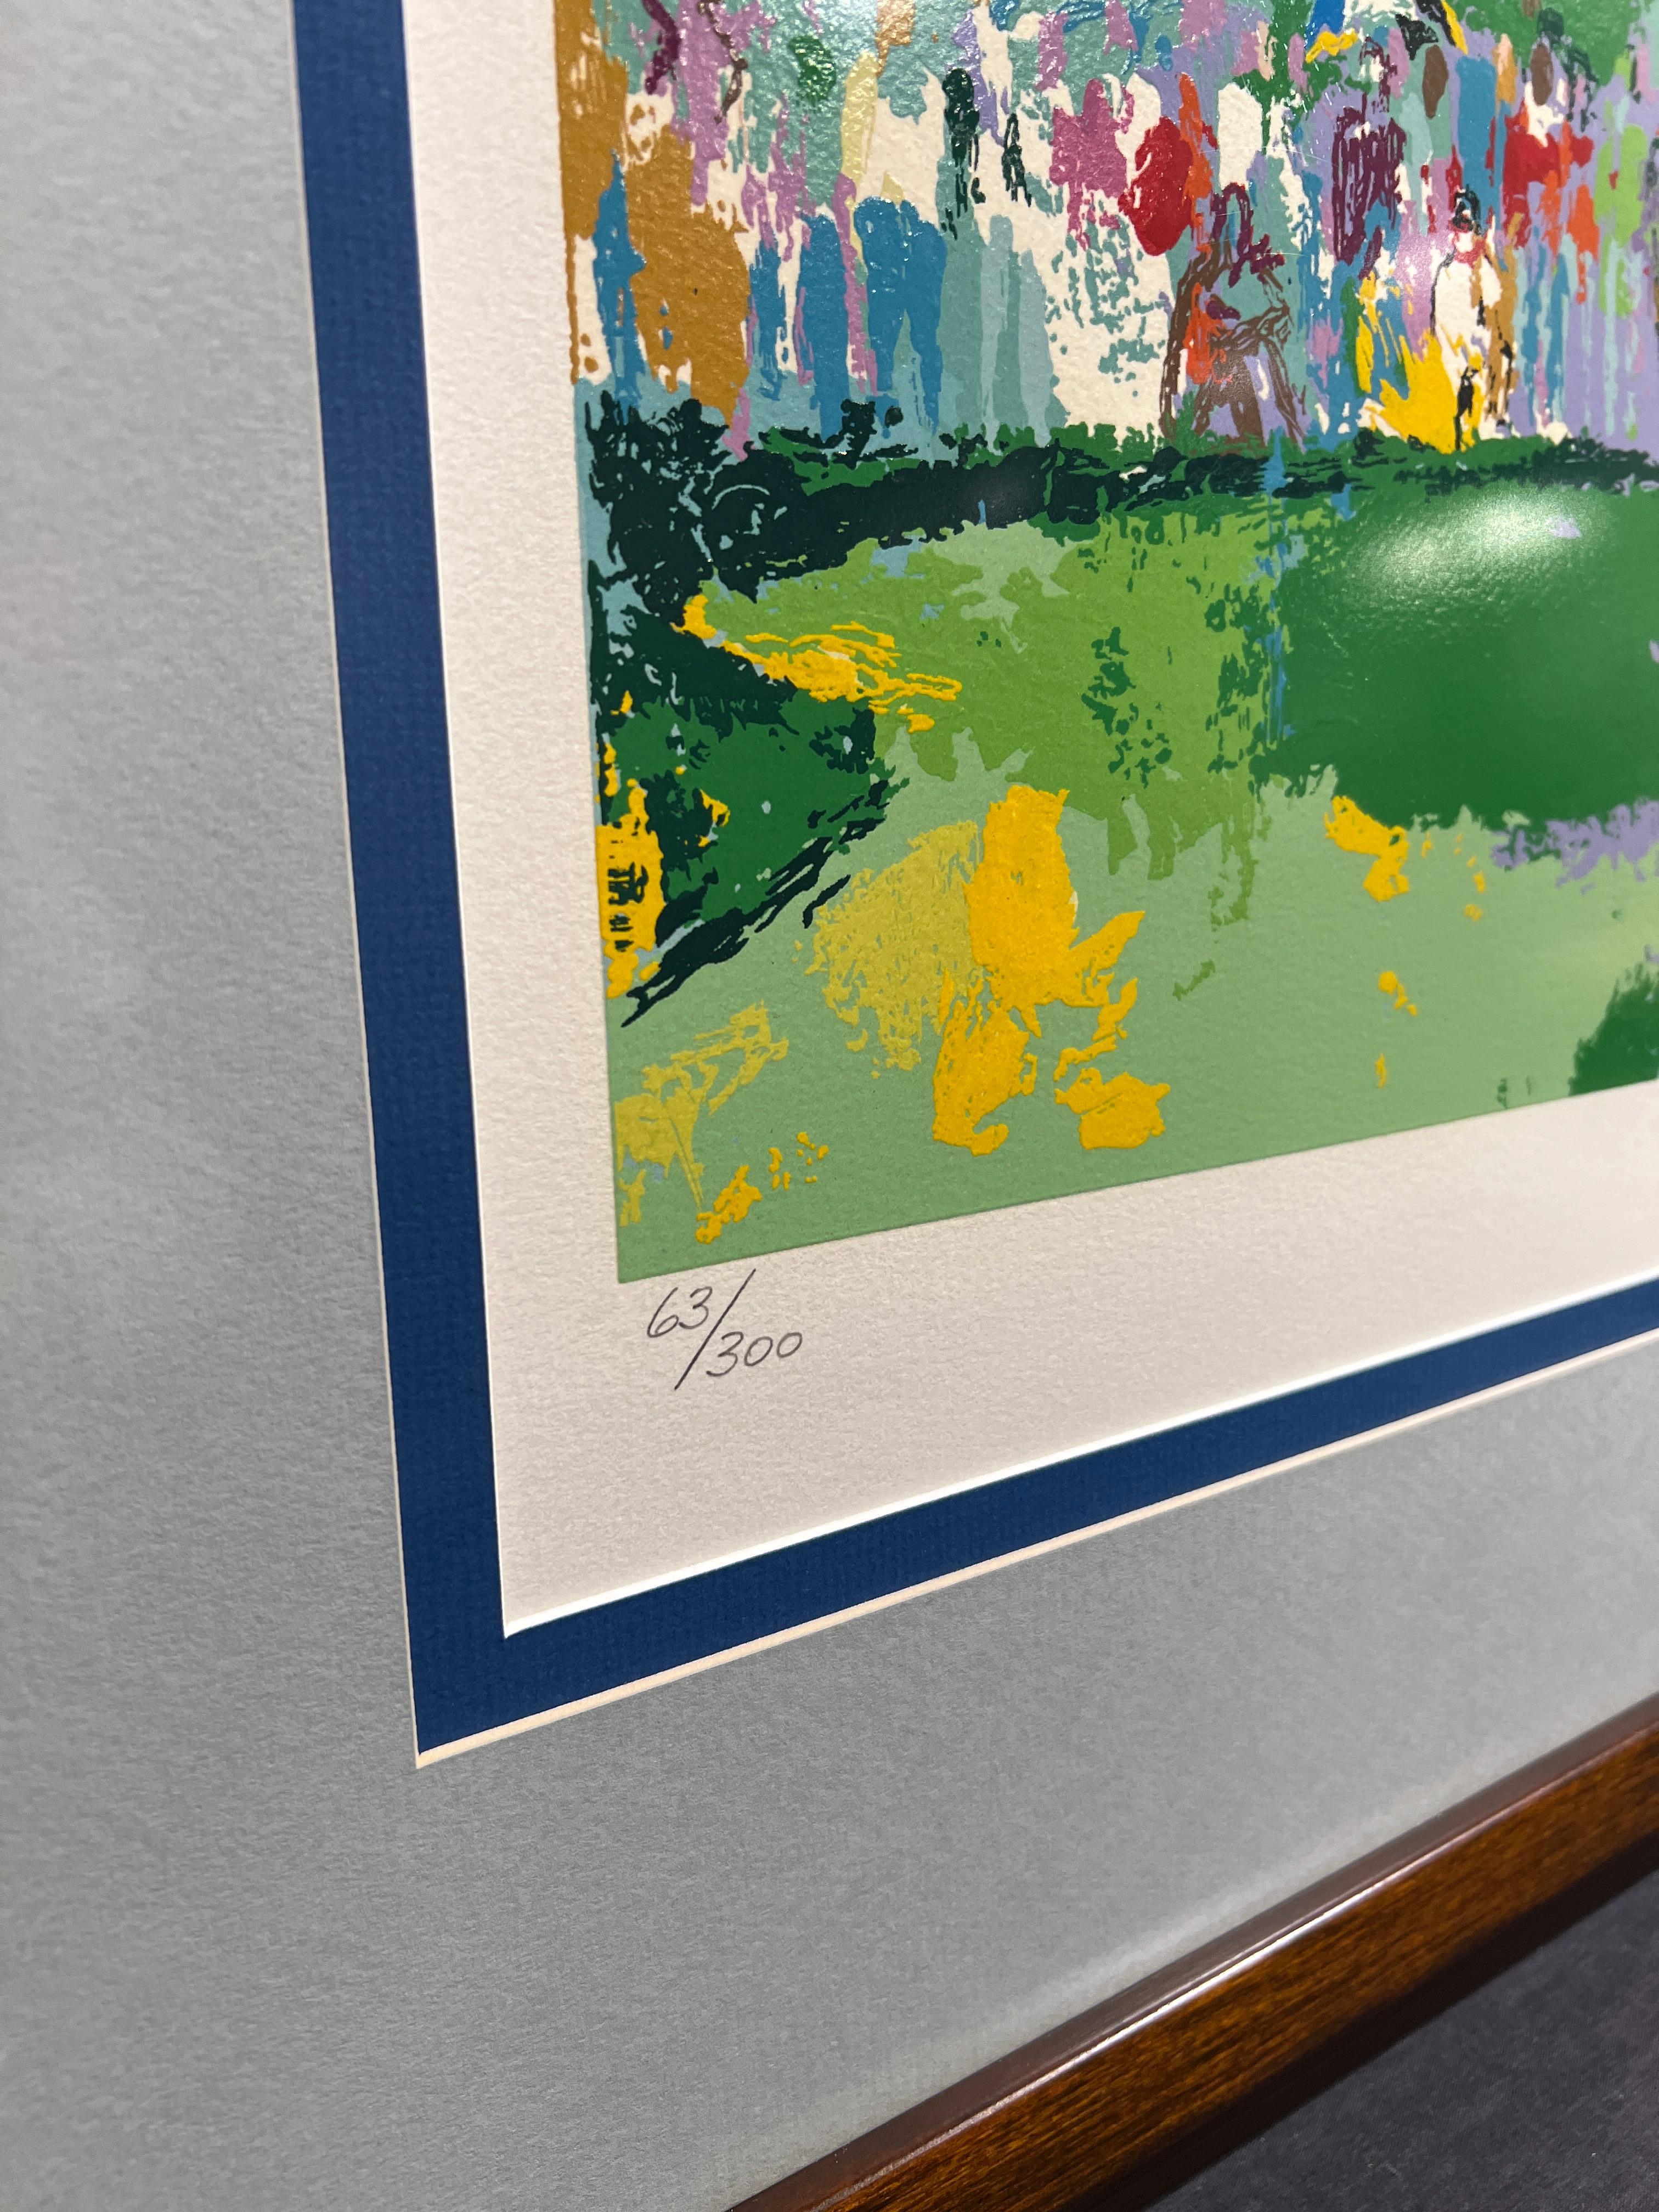 U.S. Open at Oakmont
Leroy Neiman (American, 1921-2012)
Signed in pencil lower right
Edition 63/300 lower left
27.5 x 39 inches
39.25 x 51 inches with frame

Known for his bright, colorful paintings and screen prints of famous sports stars in a